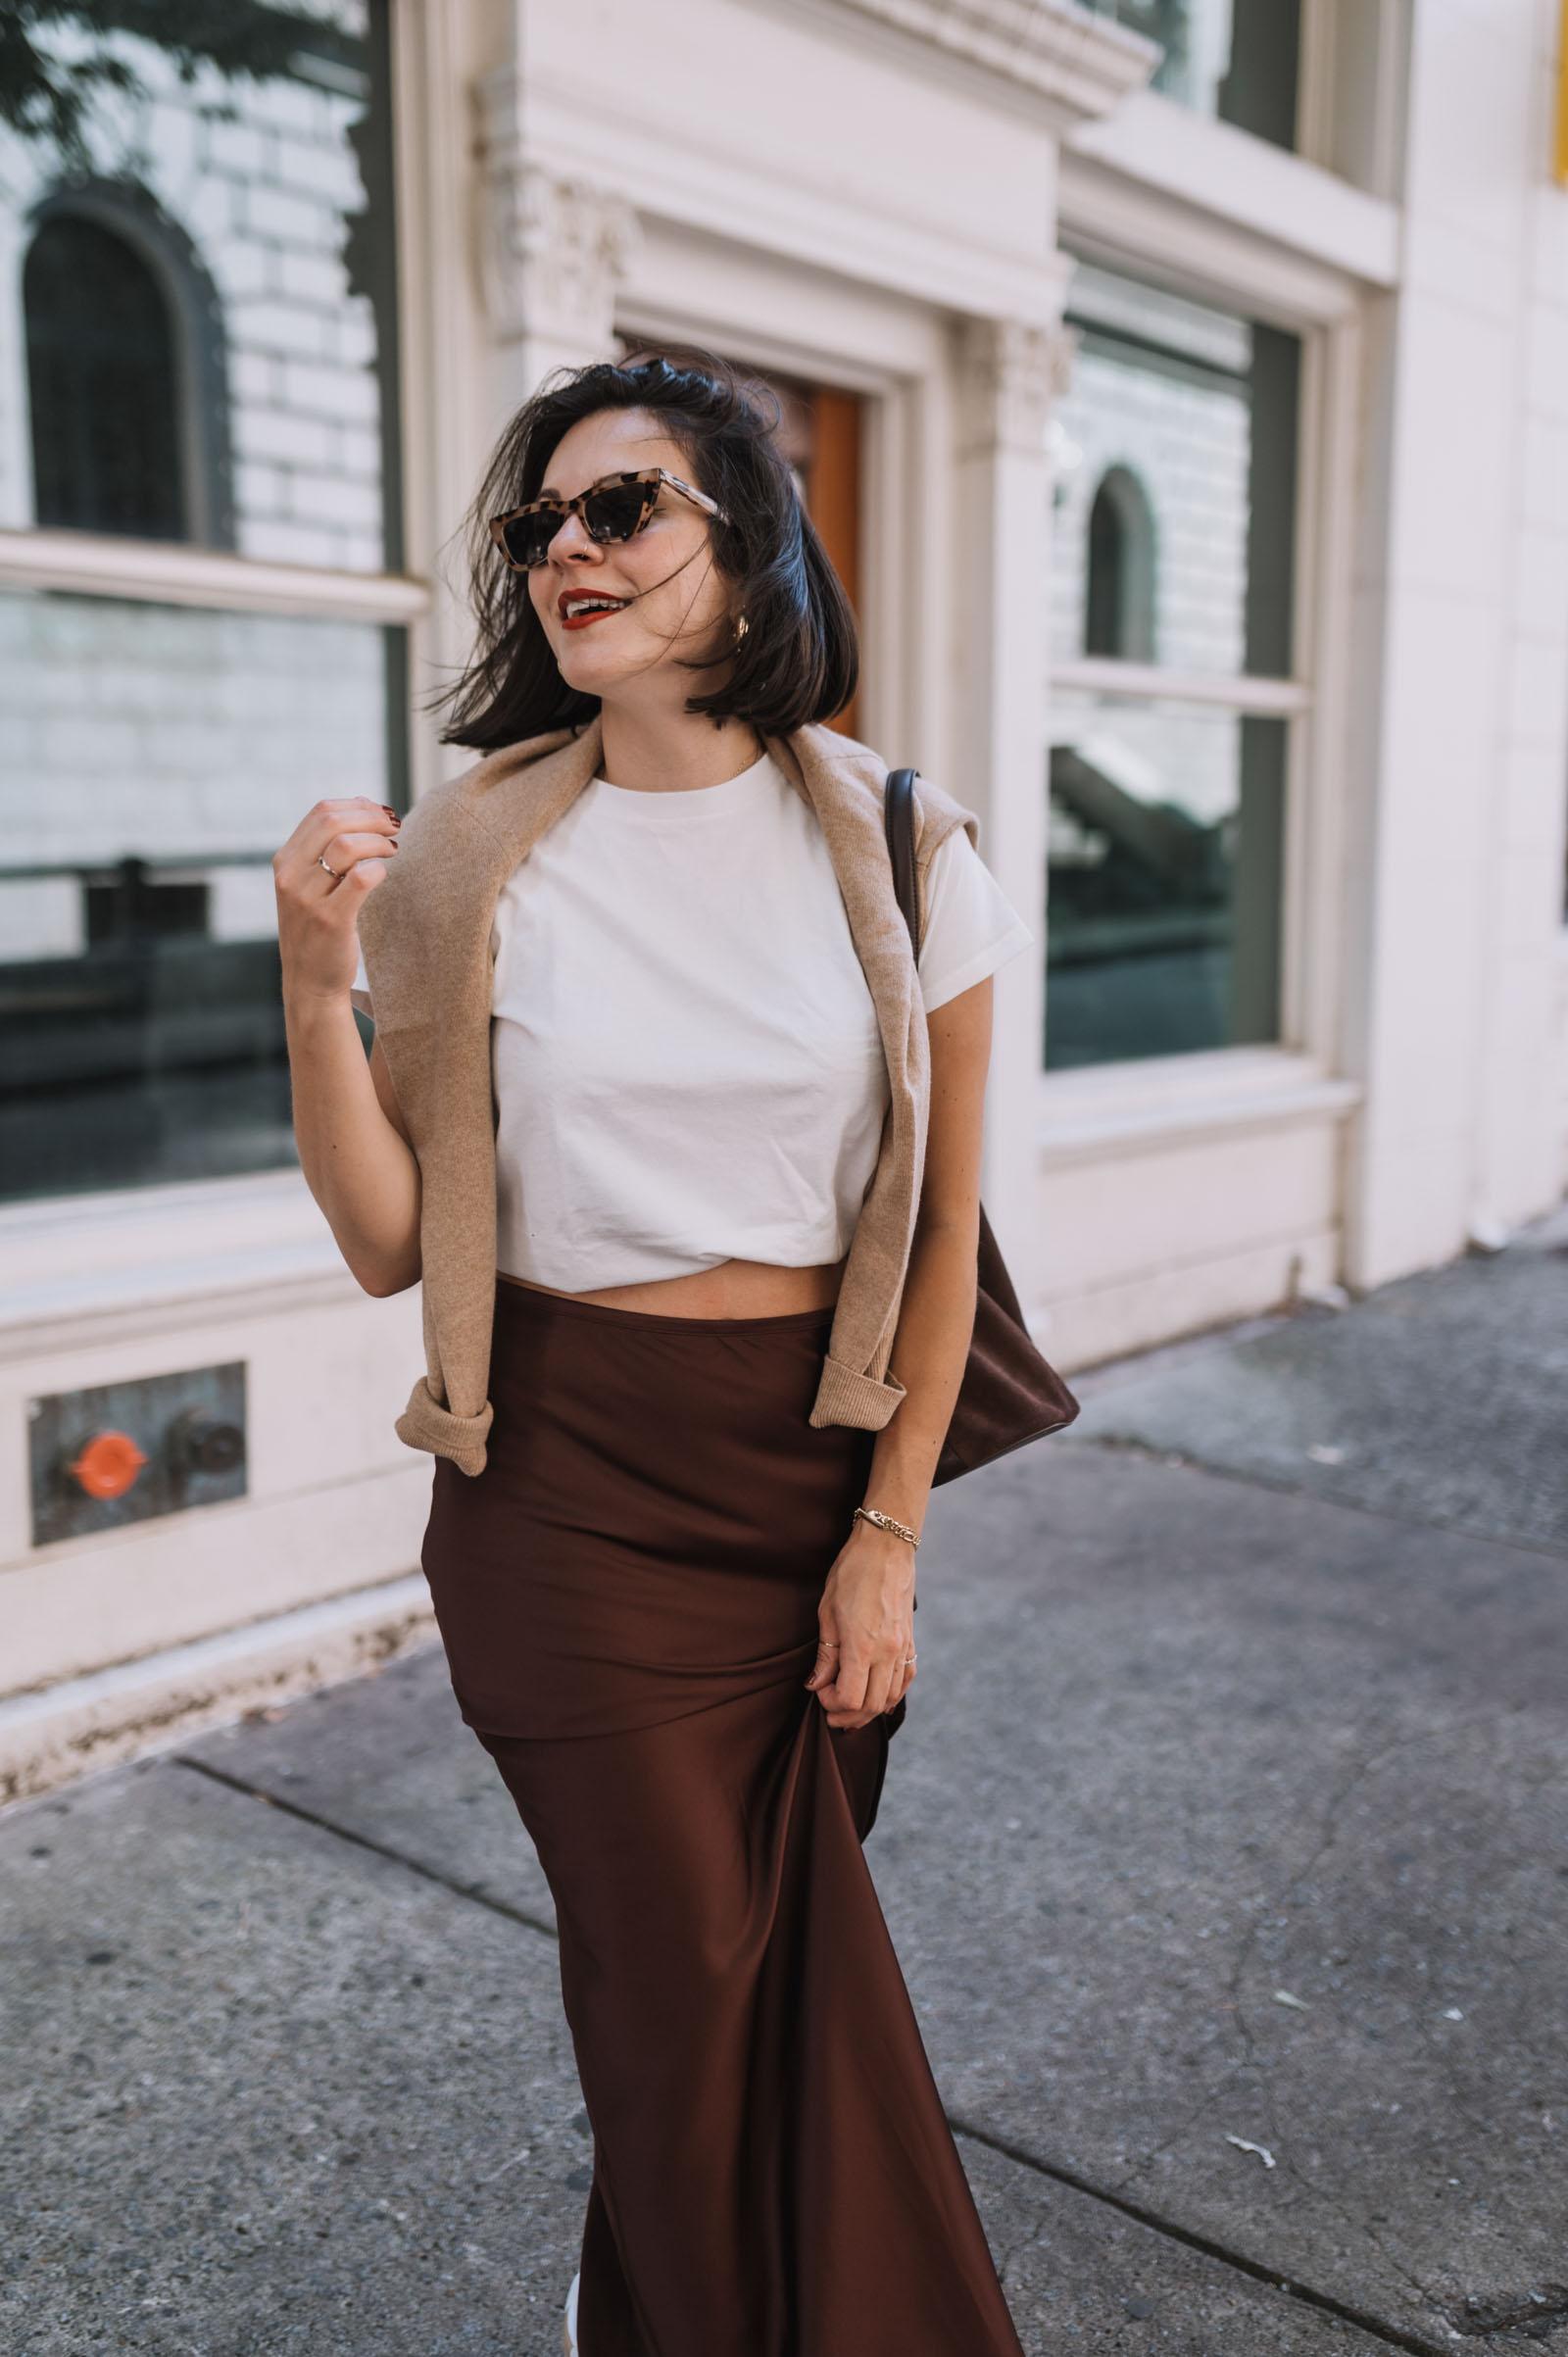 Jessica Camerata wears a brown satin maxi skirt and white tee